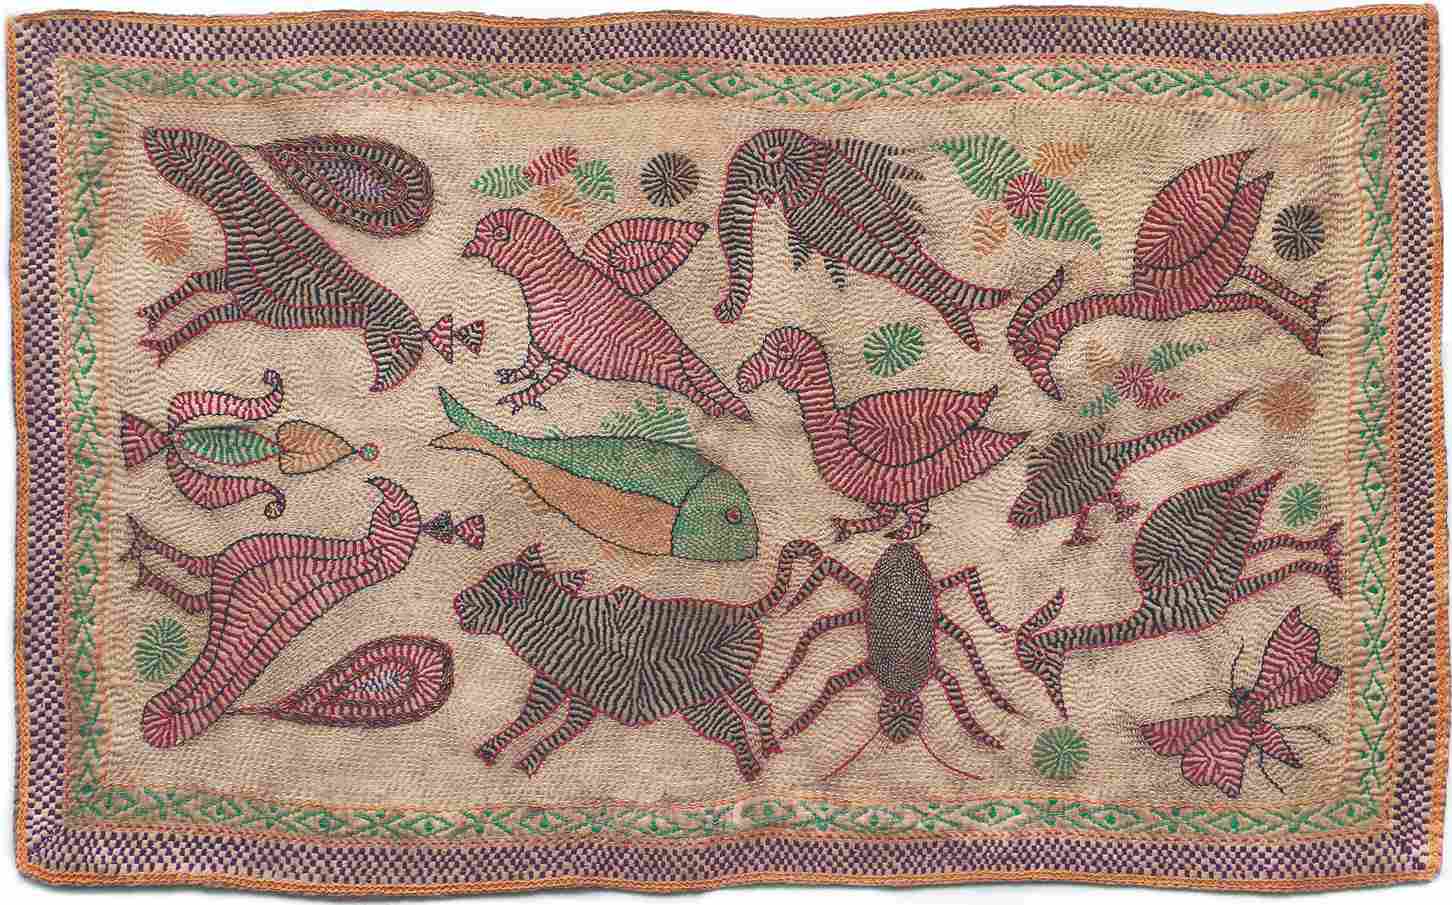 Kantha: Embroidered and quilted with the design of birds and animals, Cotton, West Bengal